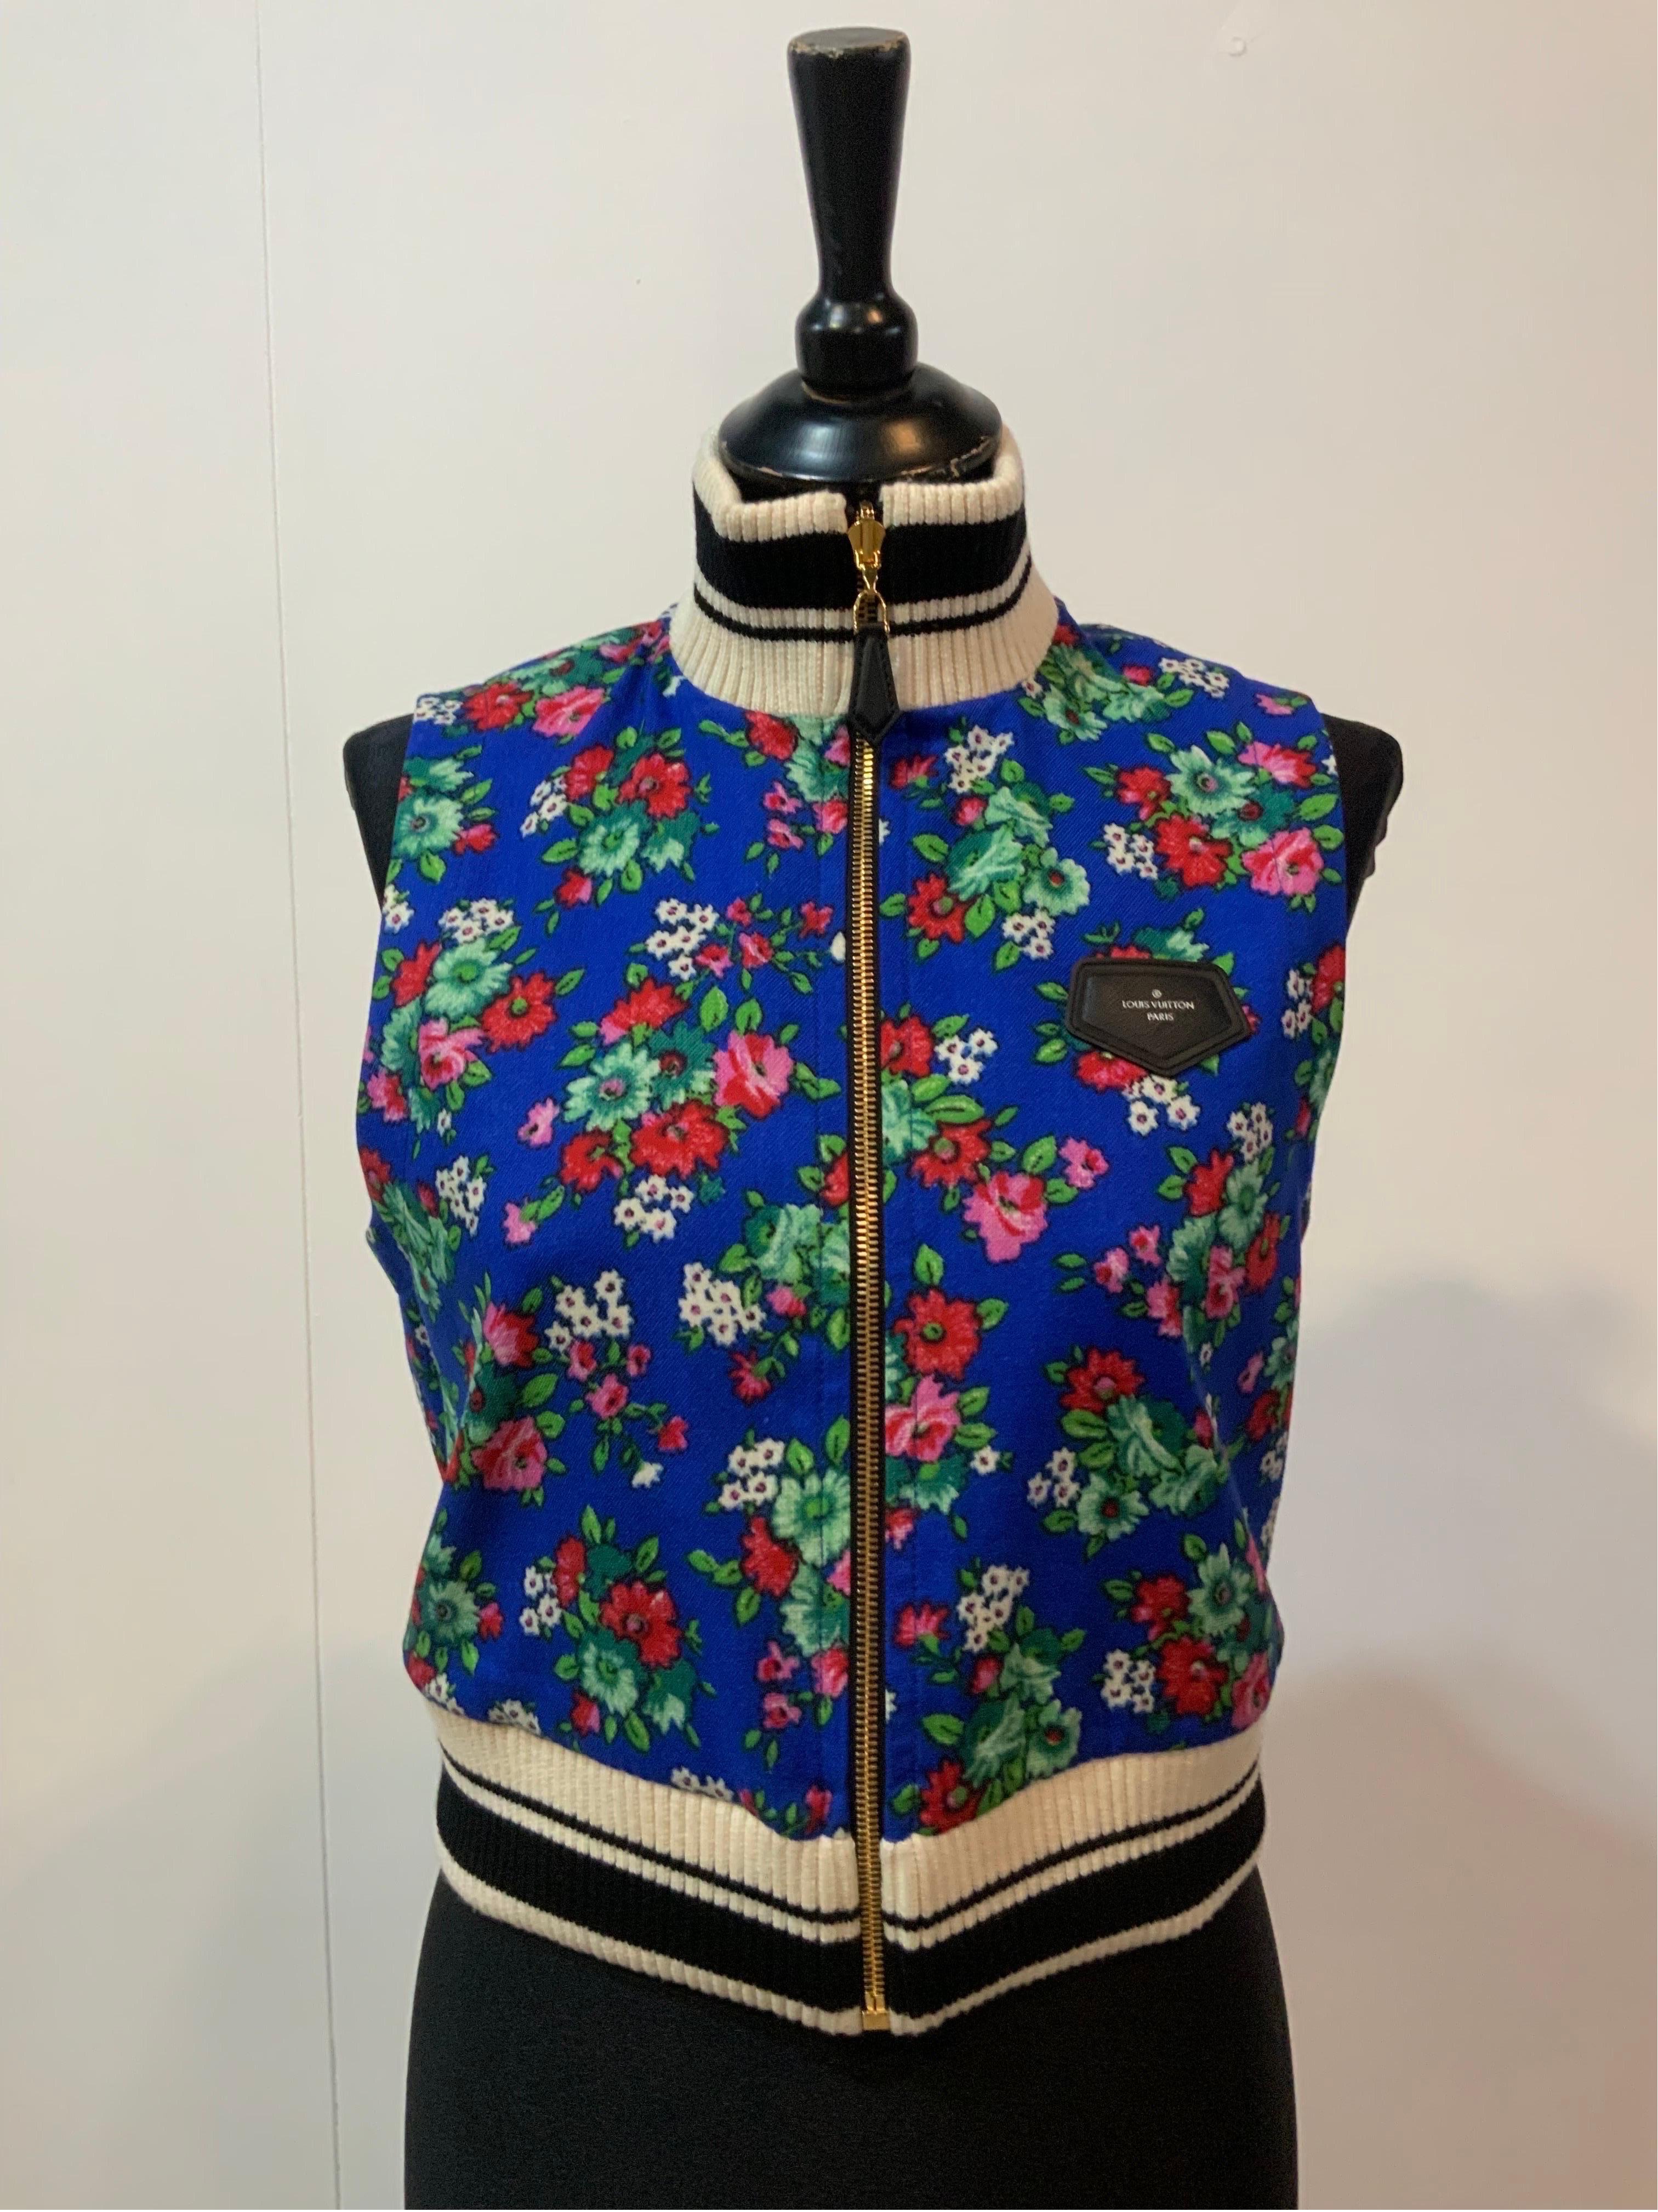 LOUIS VUITTON GILET
Double sided. Floral on one side, checked pattern on the other.
Size and composition label missing.
We think it's a wool blend.
She wears an Italian size 40.
Bust 45 cm
Length 54 cm
Excellent general conditions.